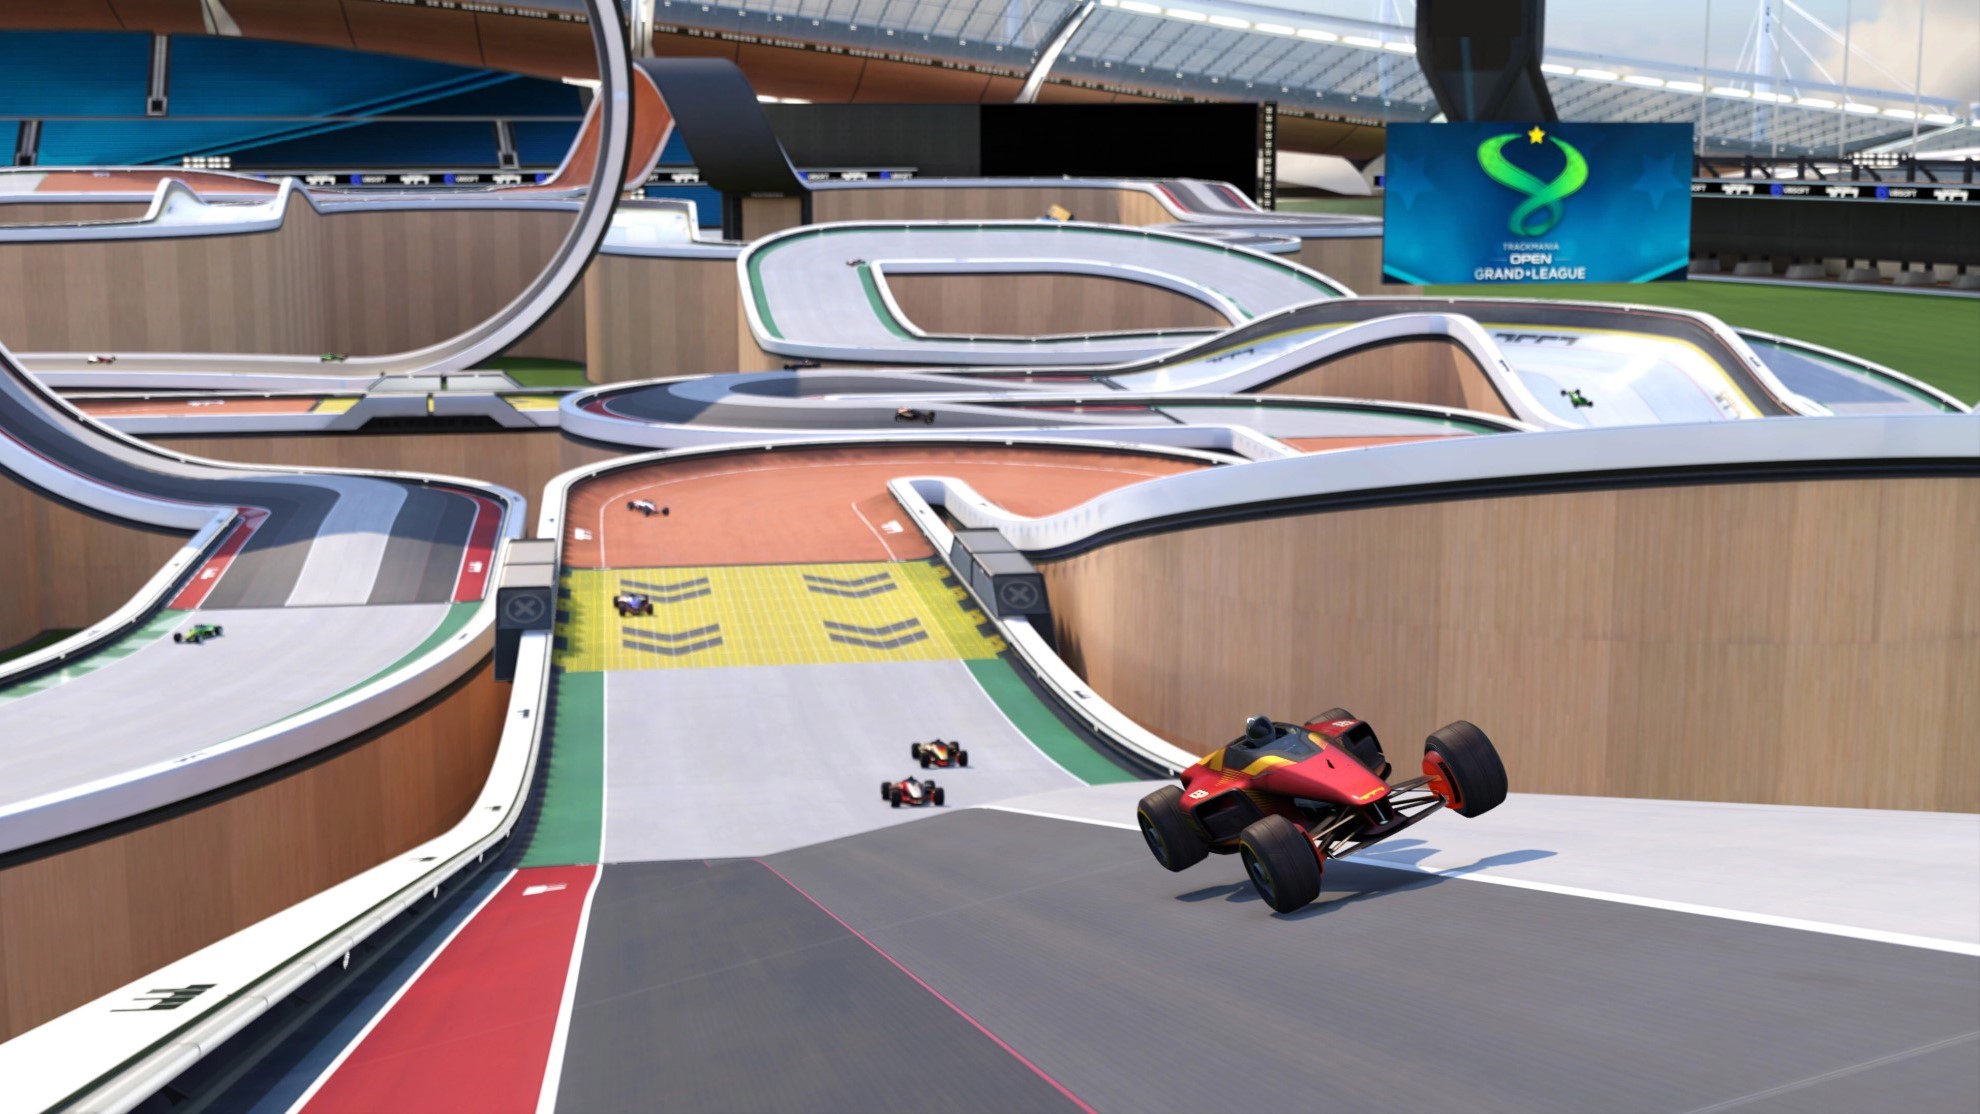 Trackmania: Prime Gaming grants free 3-month Club Access!